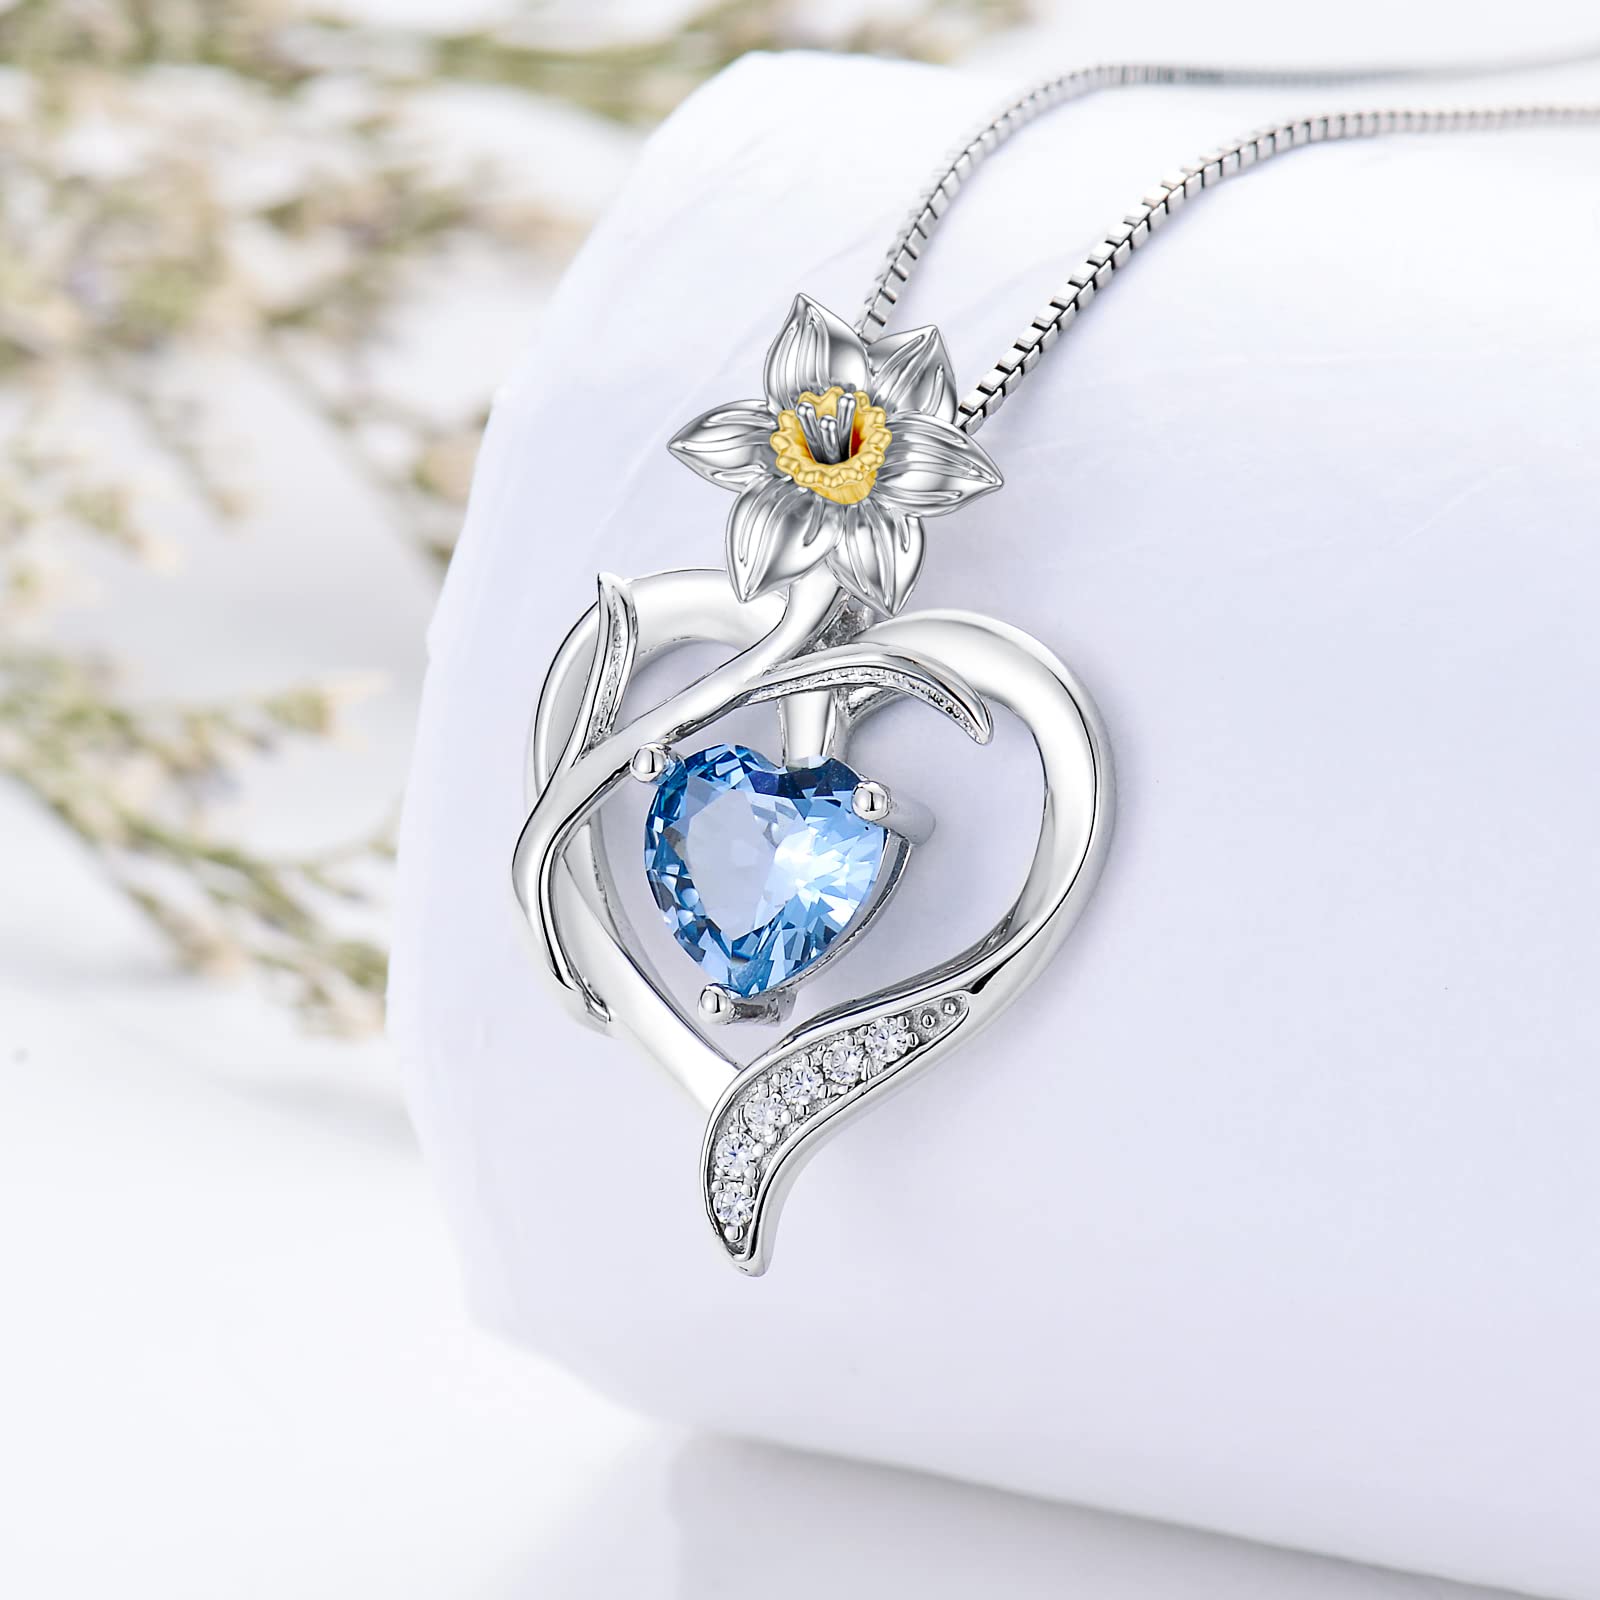 TOUPOP 925 Sterling Silver Birth Month Flower Floral Heart Pendant Necklace with Birthstone Birthday Graduation Jewelry for Women Girls